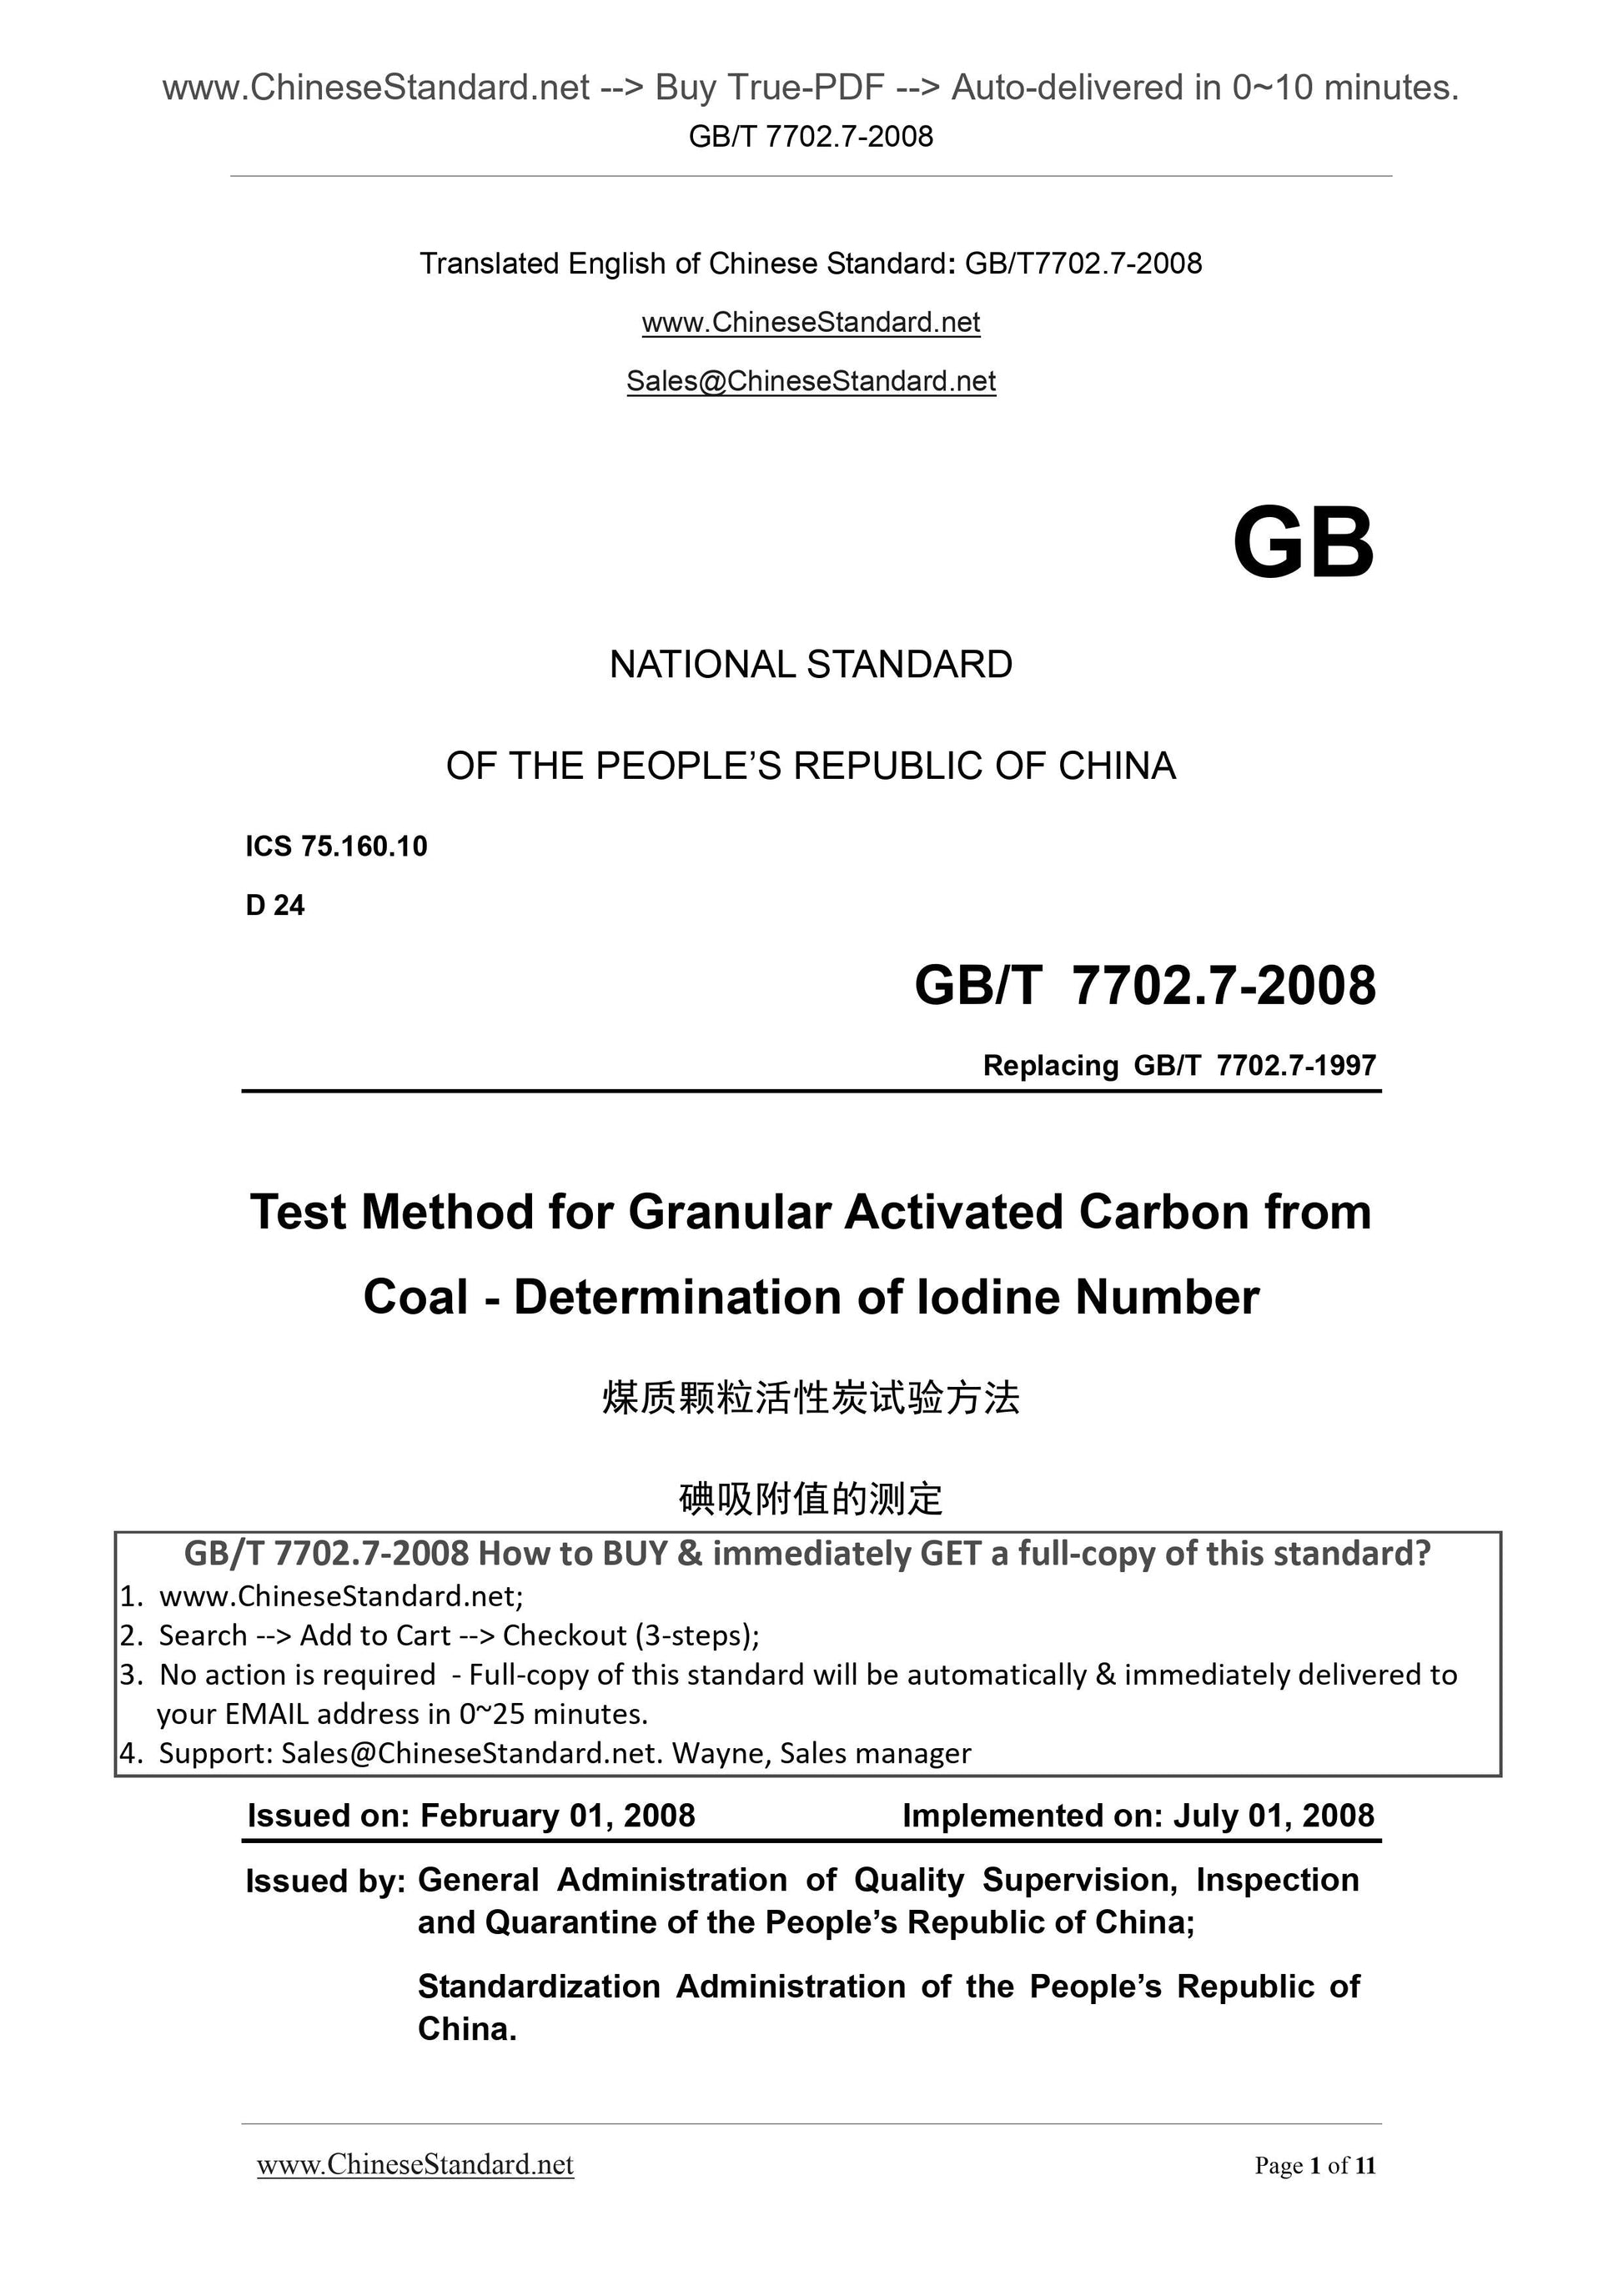 GB/T 7702.7-2008 Page 1